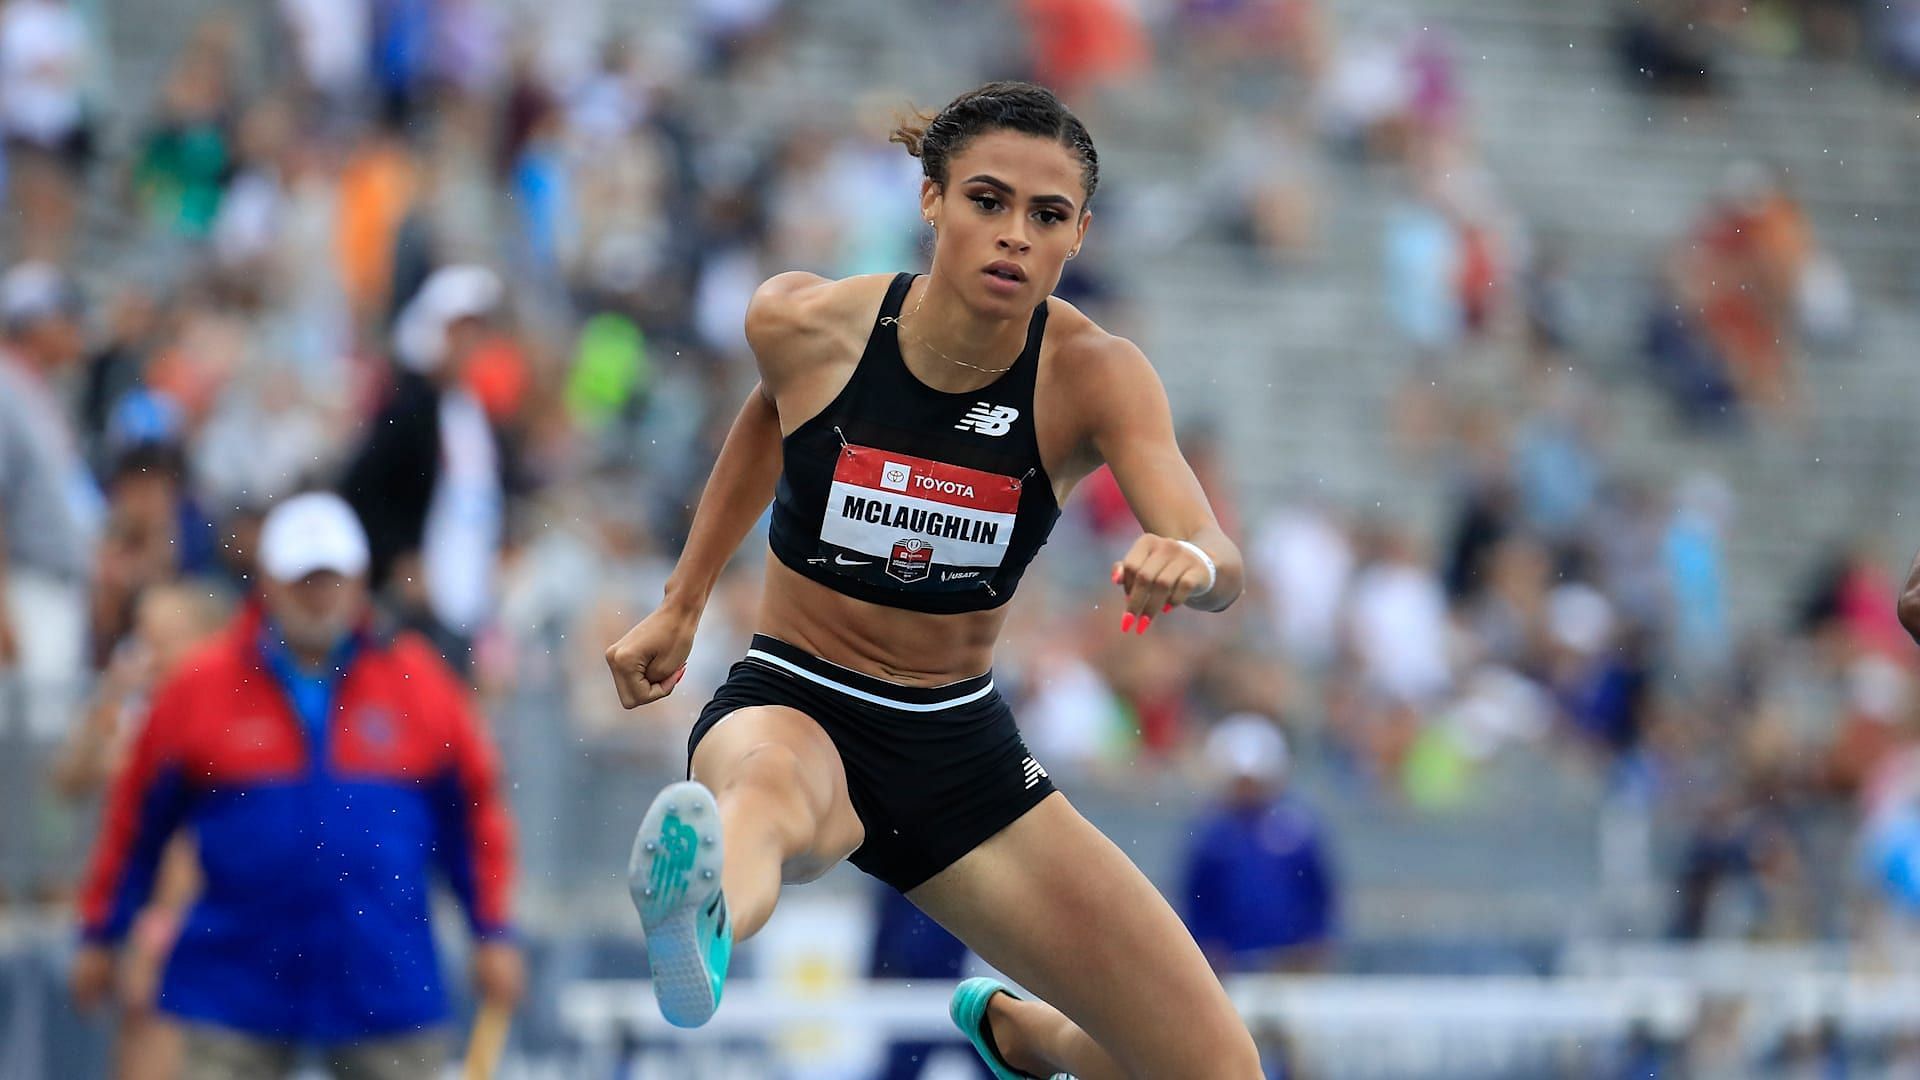 Sydney McLaughlin won gold at the 2020 Summer Olympics in Tokyo (Image via Olympics)